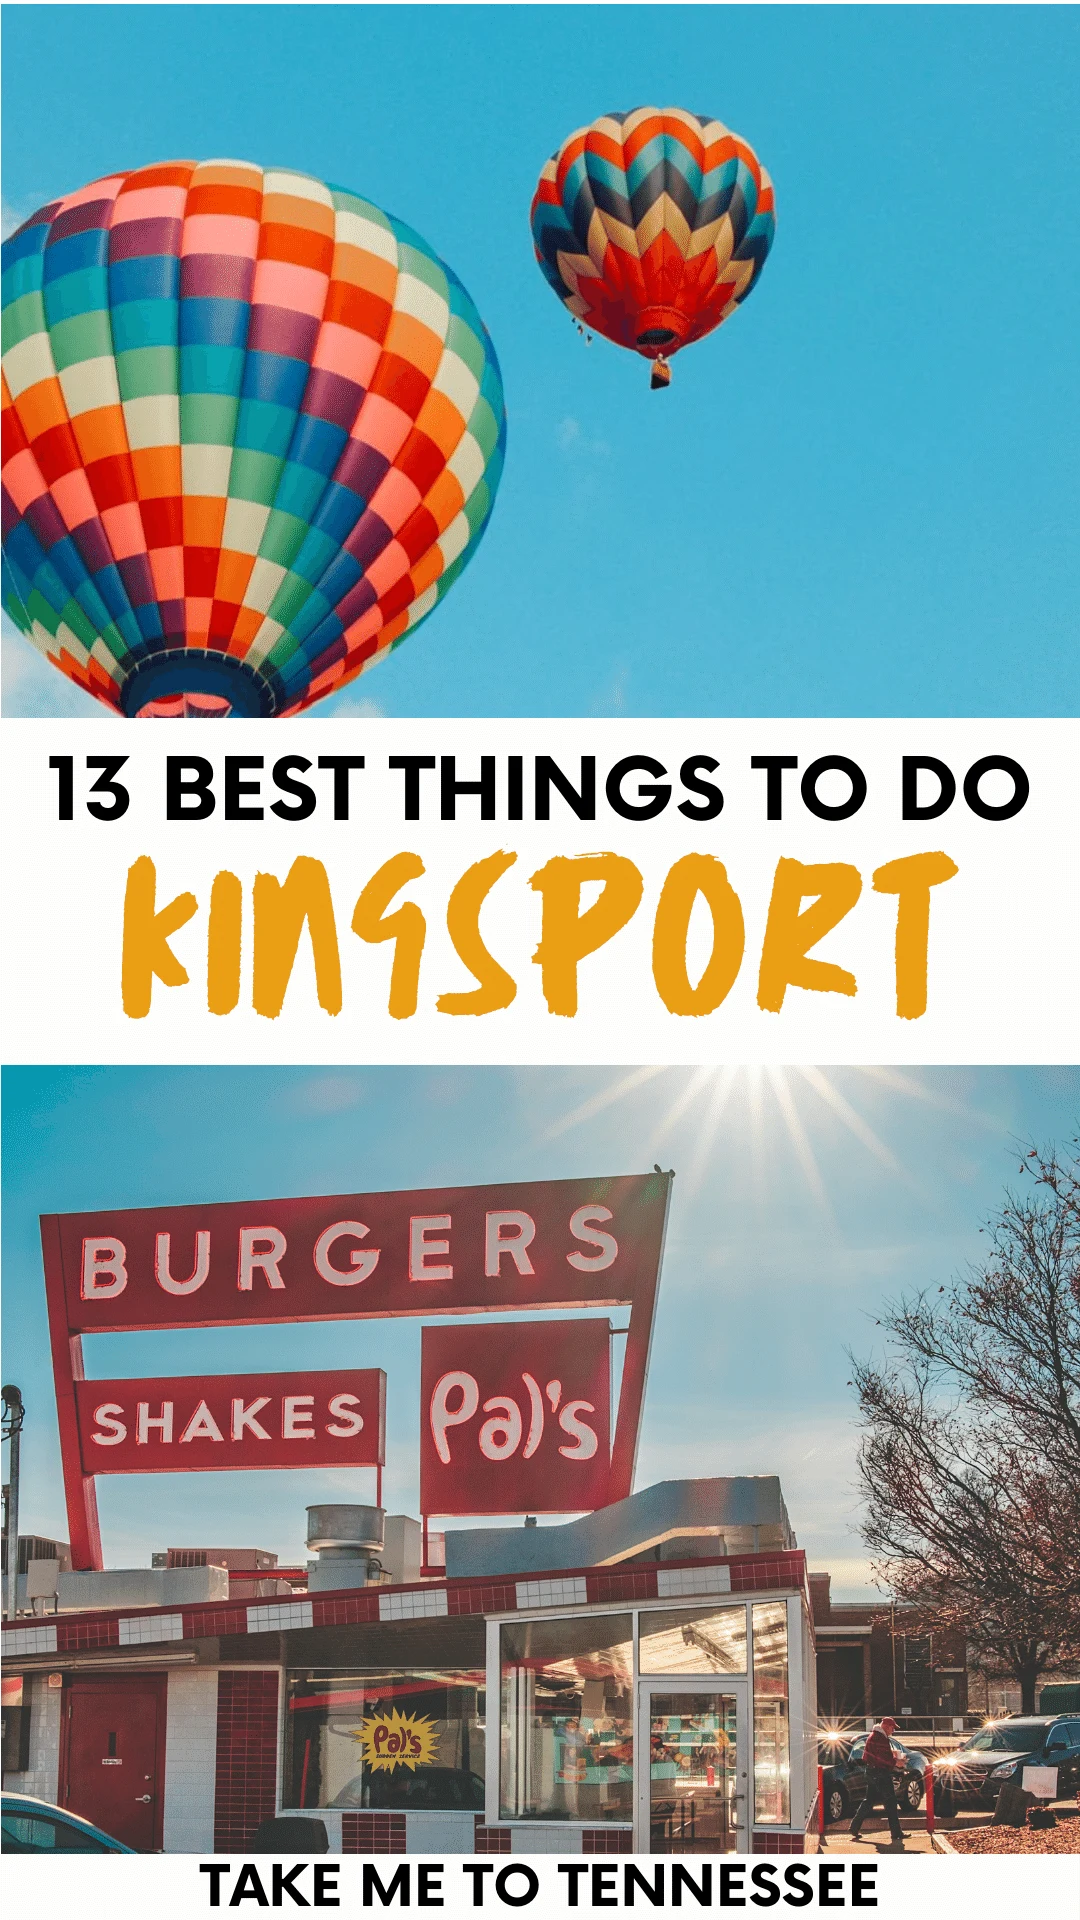 Gallery images of Kingsport Tennessee activities (top: Hot air balloon ride, bottom: Pal's restaurant). Text overlay reads, "13 Best Things To Do Kingsport"